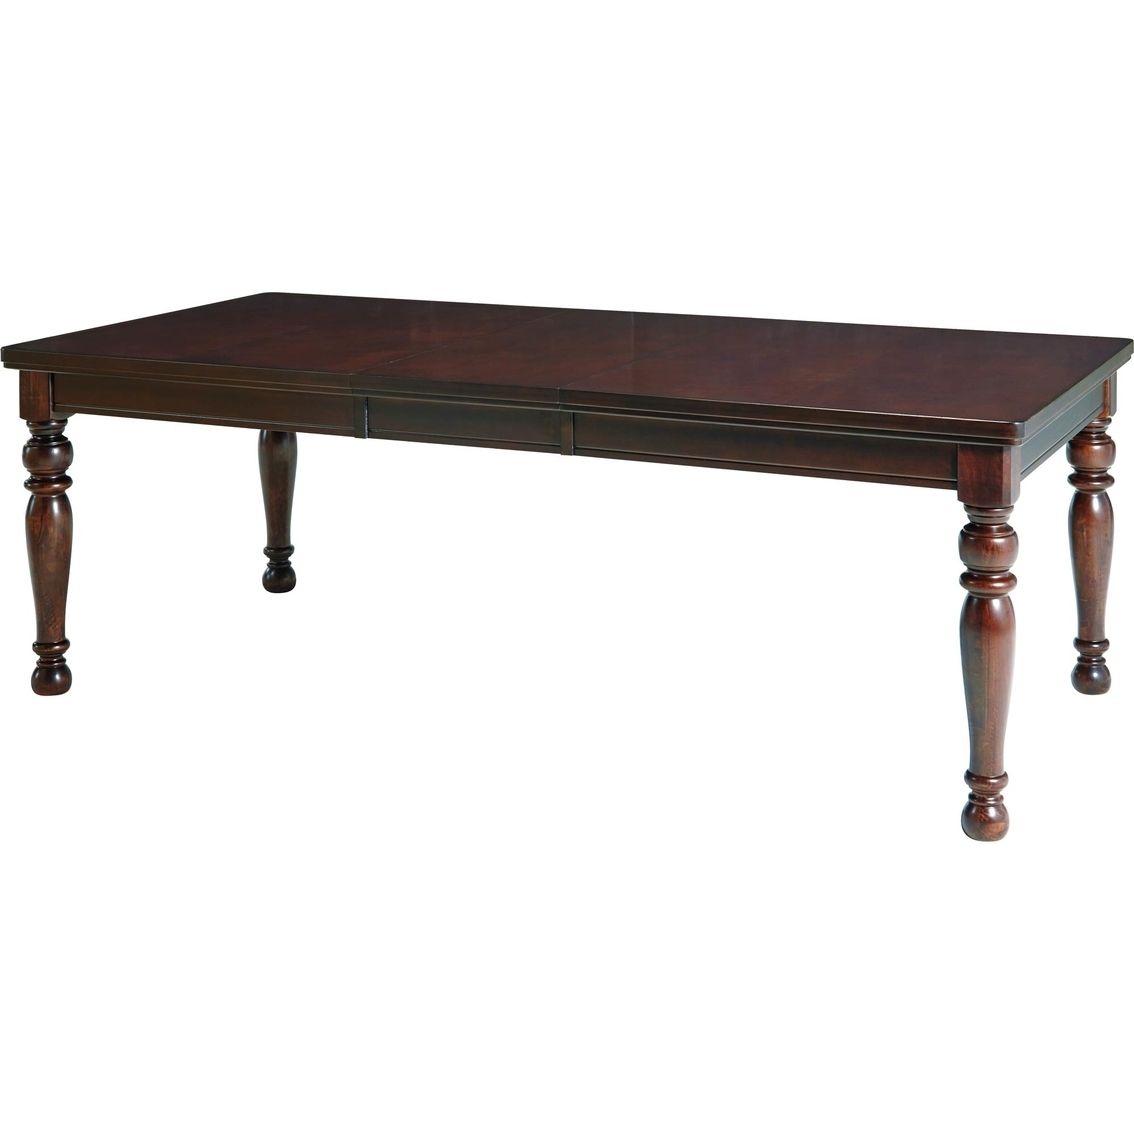 Signature Designashley Porter Rectangular Extension Dining Table In 2017 Rectangular Barbox Coffee Tables (View 13 of 20)